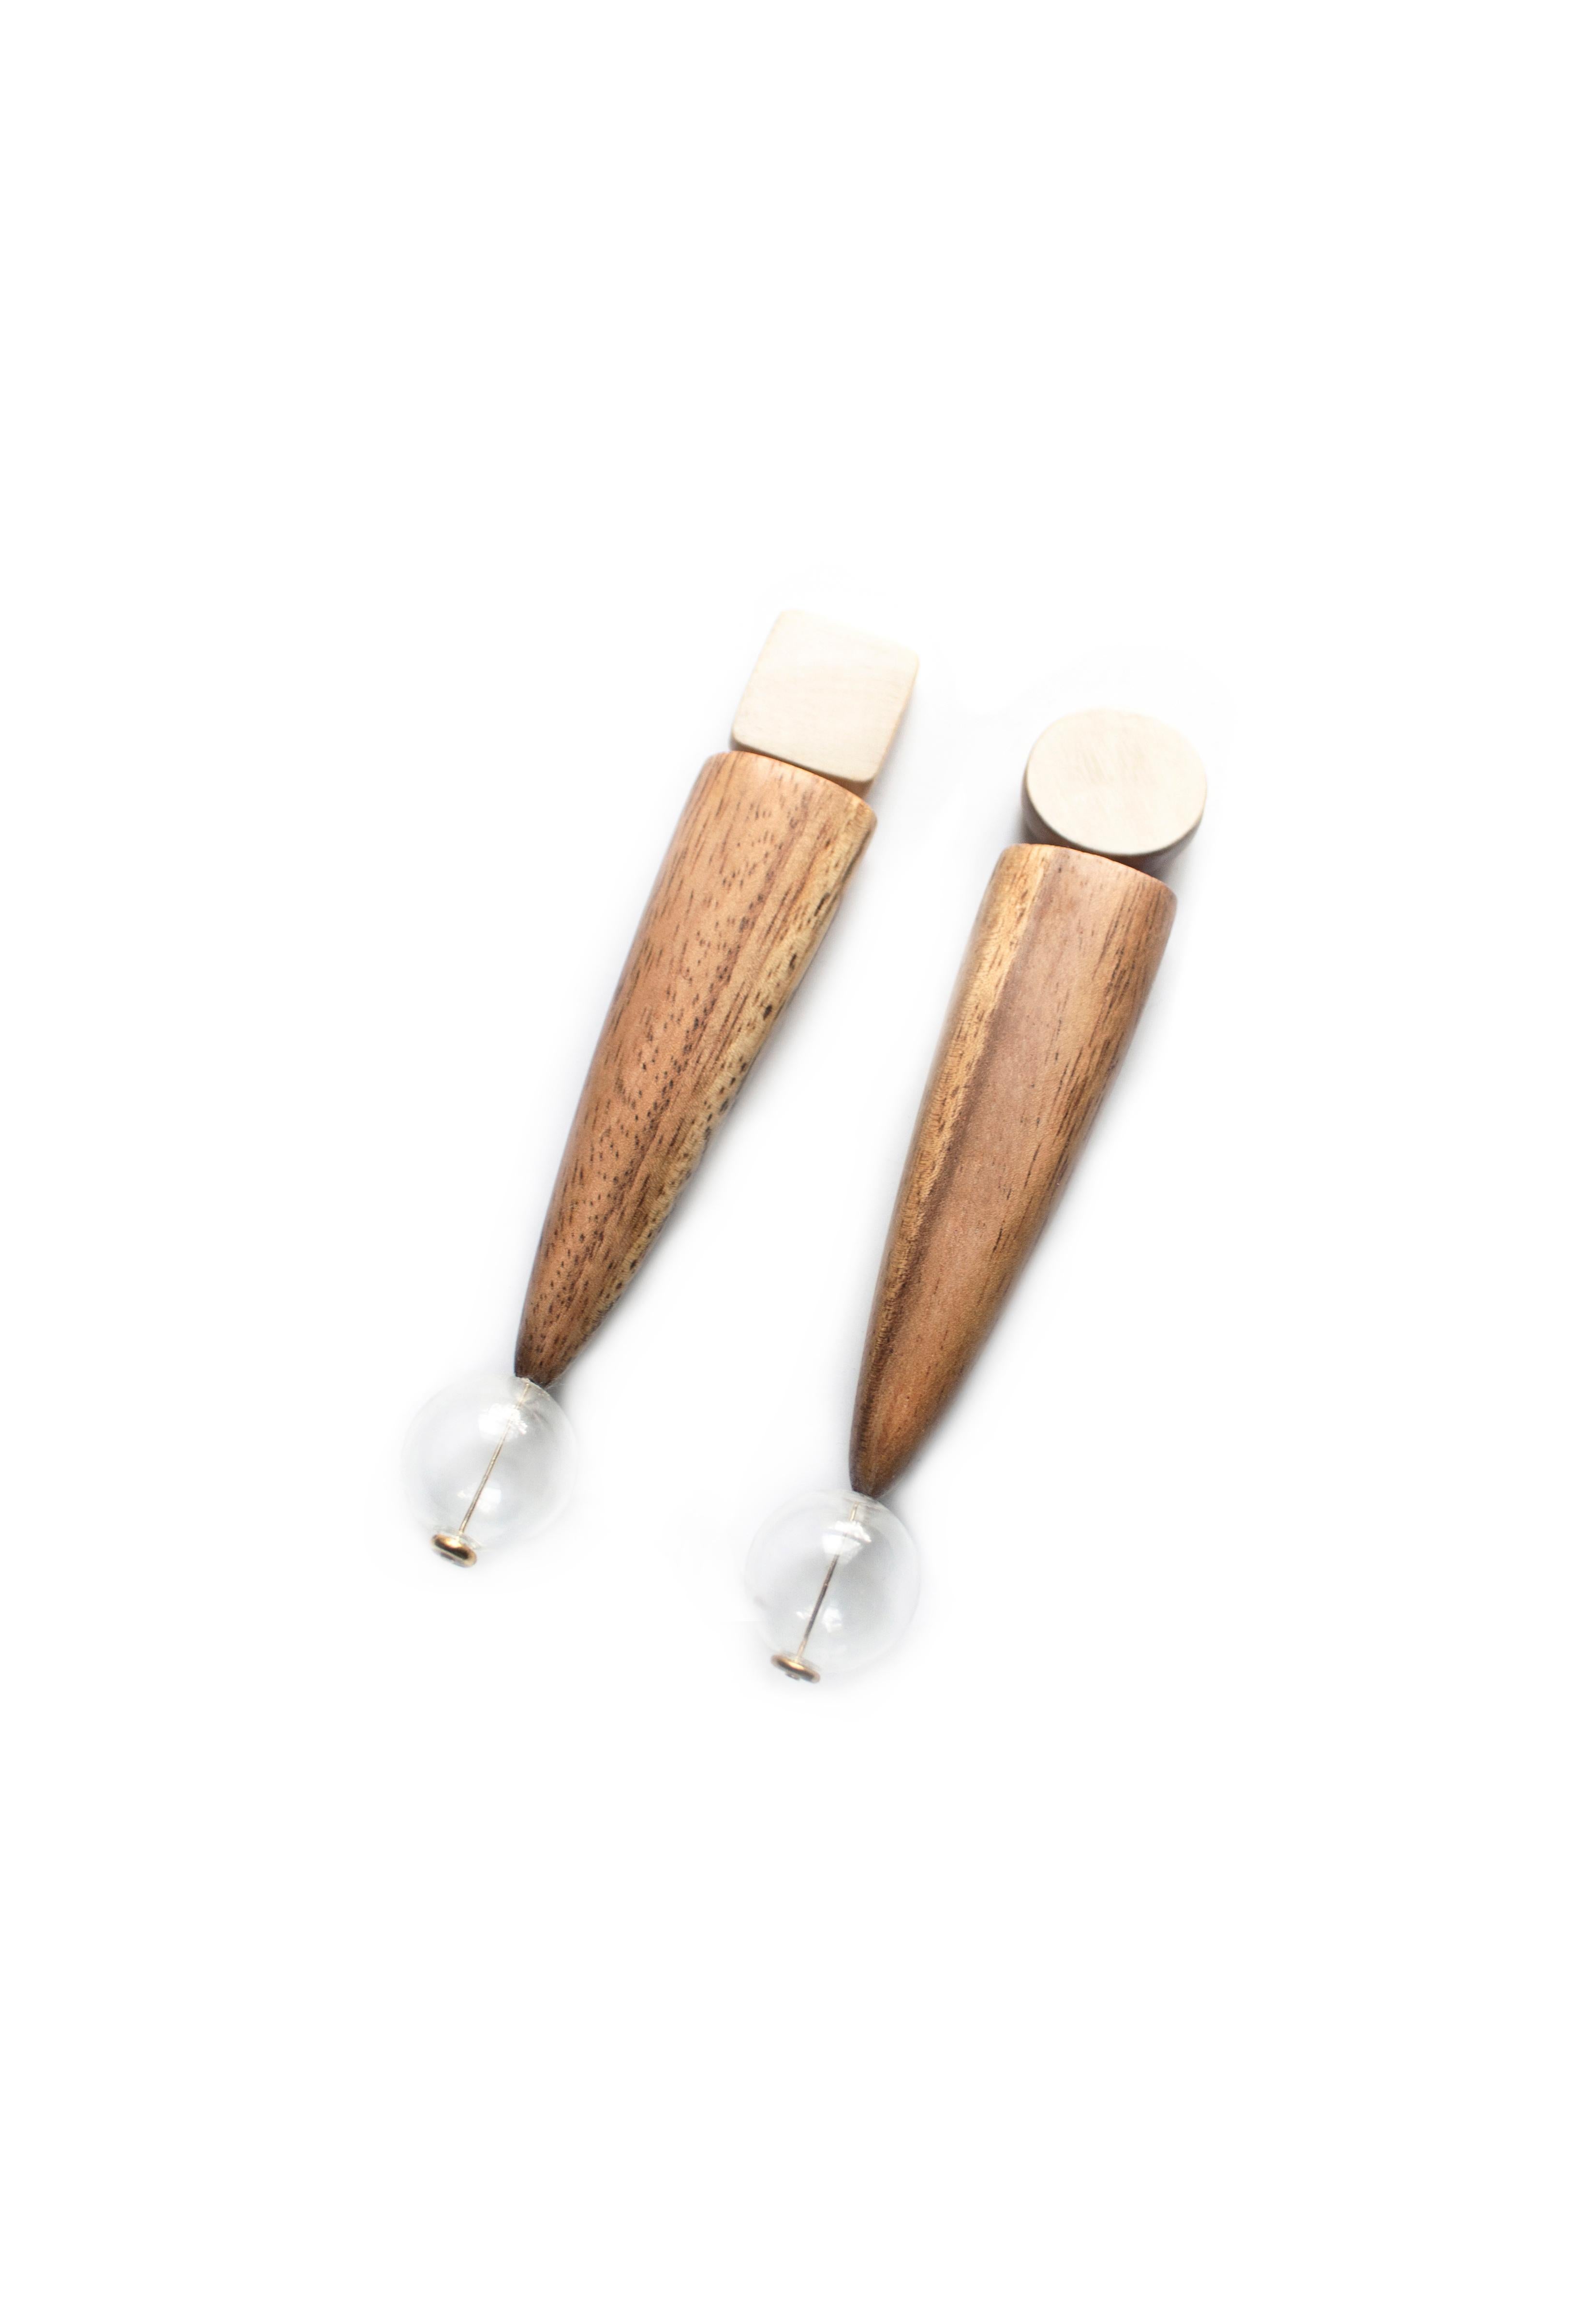 Large wood dangle mod earrings inspired by the mid-century surfboard aesthetic.  Hand carved reclaimed acacia with affixed spherical blown glass embellishment.  Hypoallergenic stainless steel posts. 

All Hola Luna pieces are handcrafted one-off